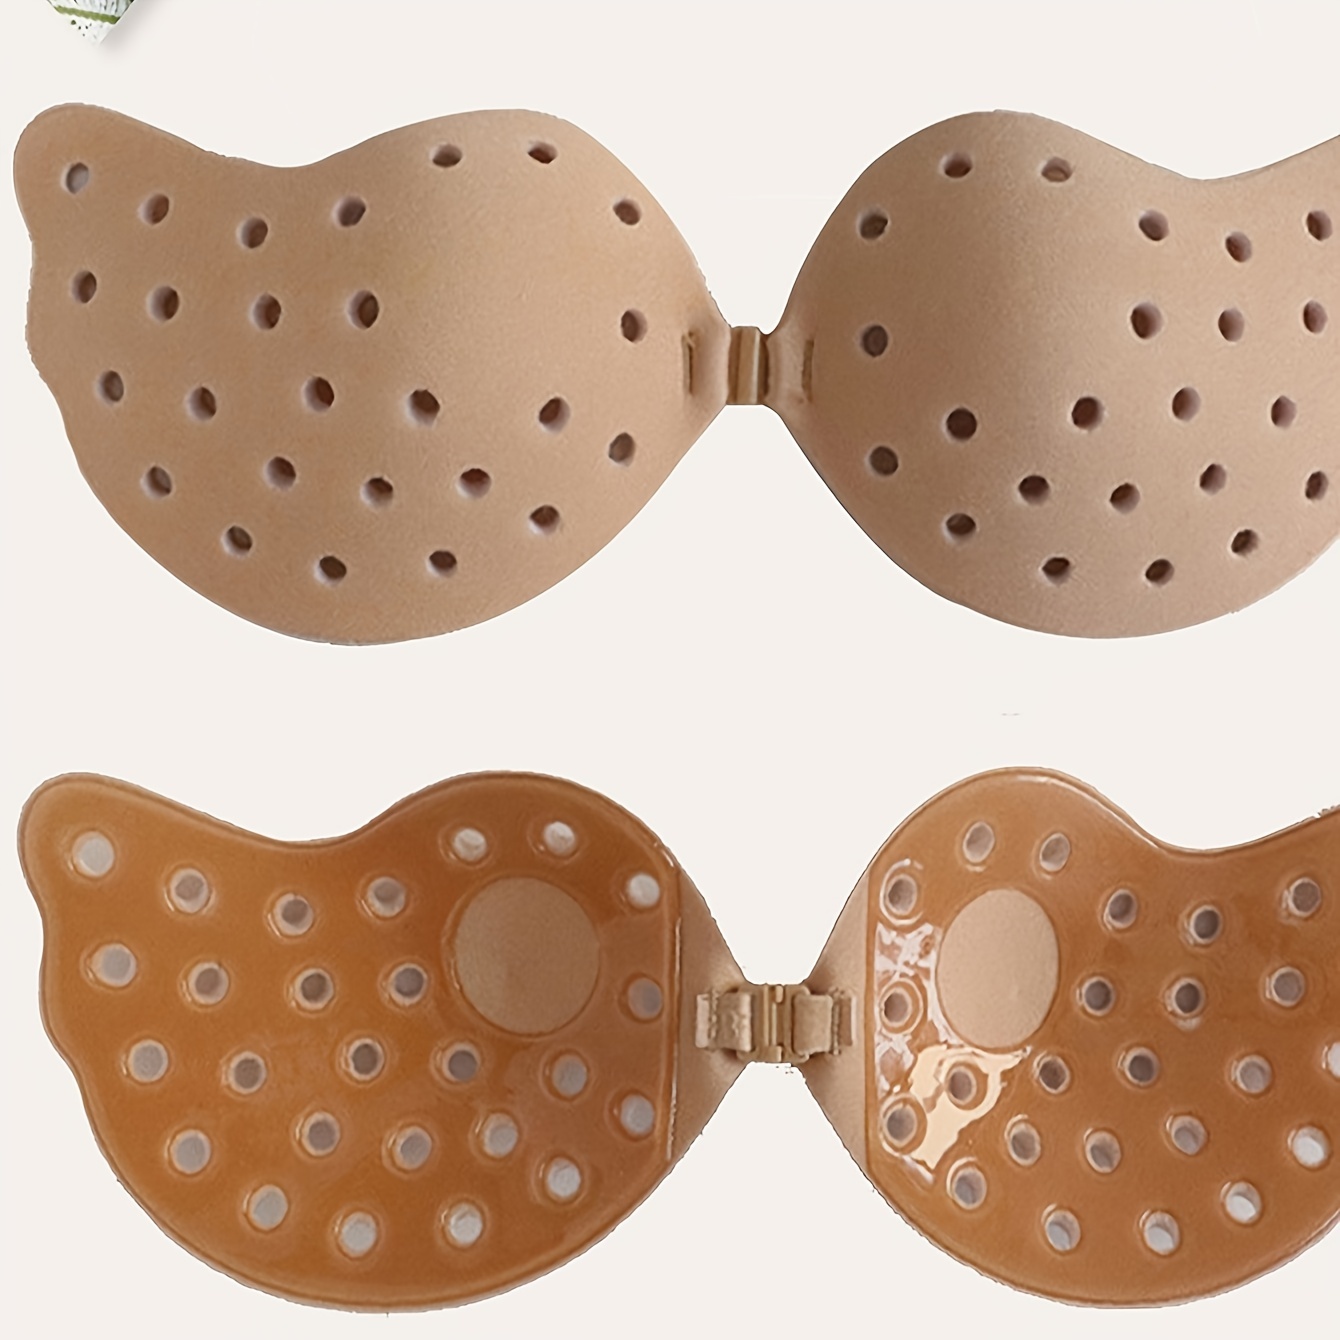 Silicone Bra And Breast Lift Detox Foot Pads With Invisible Rabbit Ear  Design Available In From Fz916745, $1.69